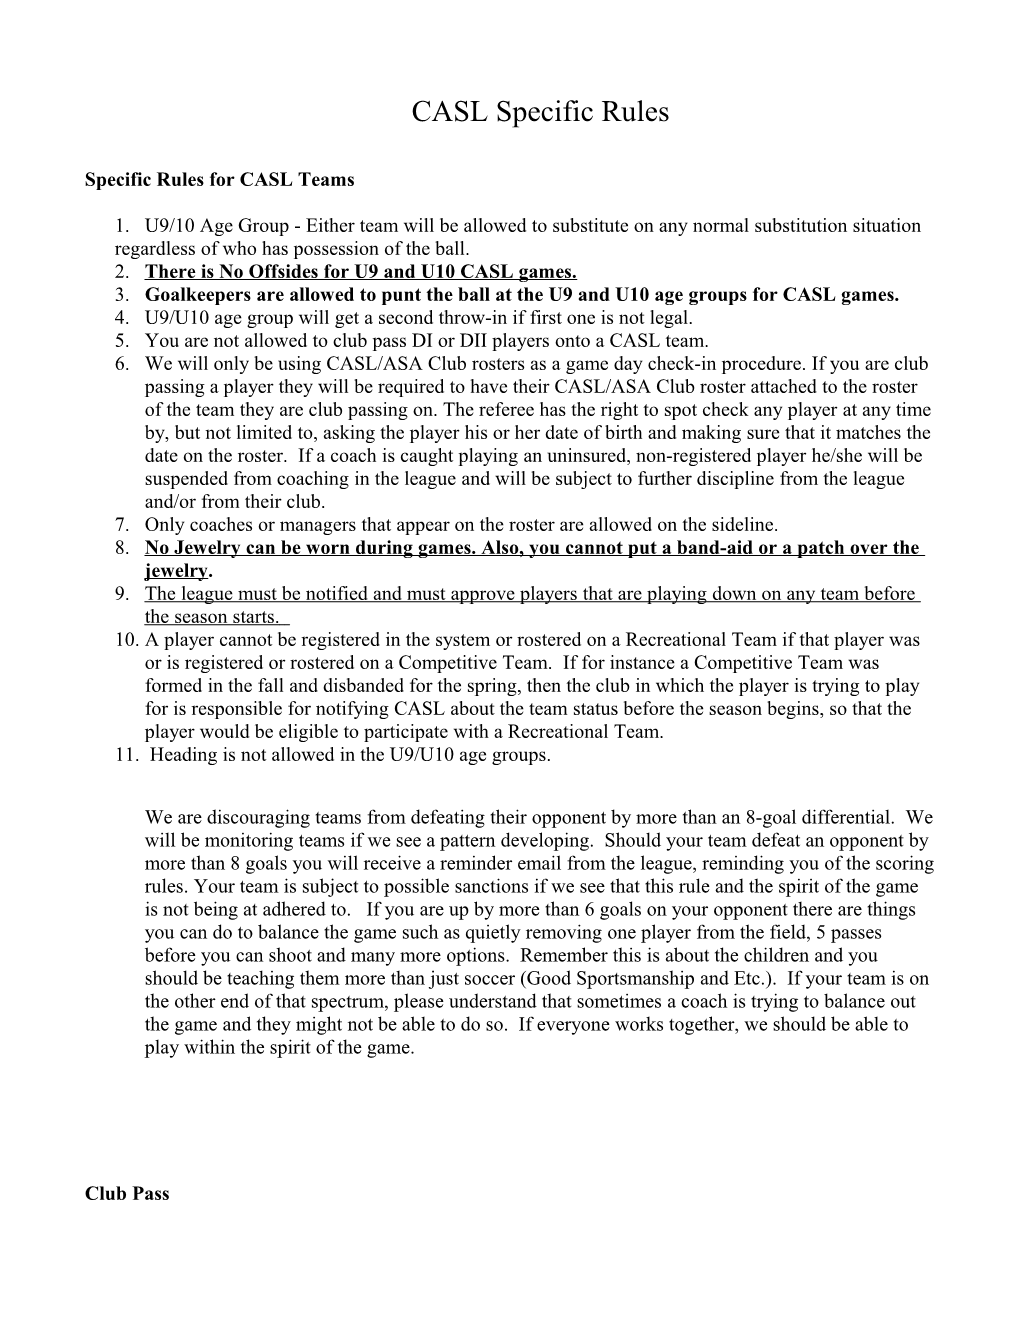 Specific Rules for CASL Teams